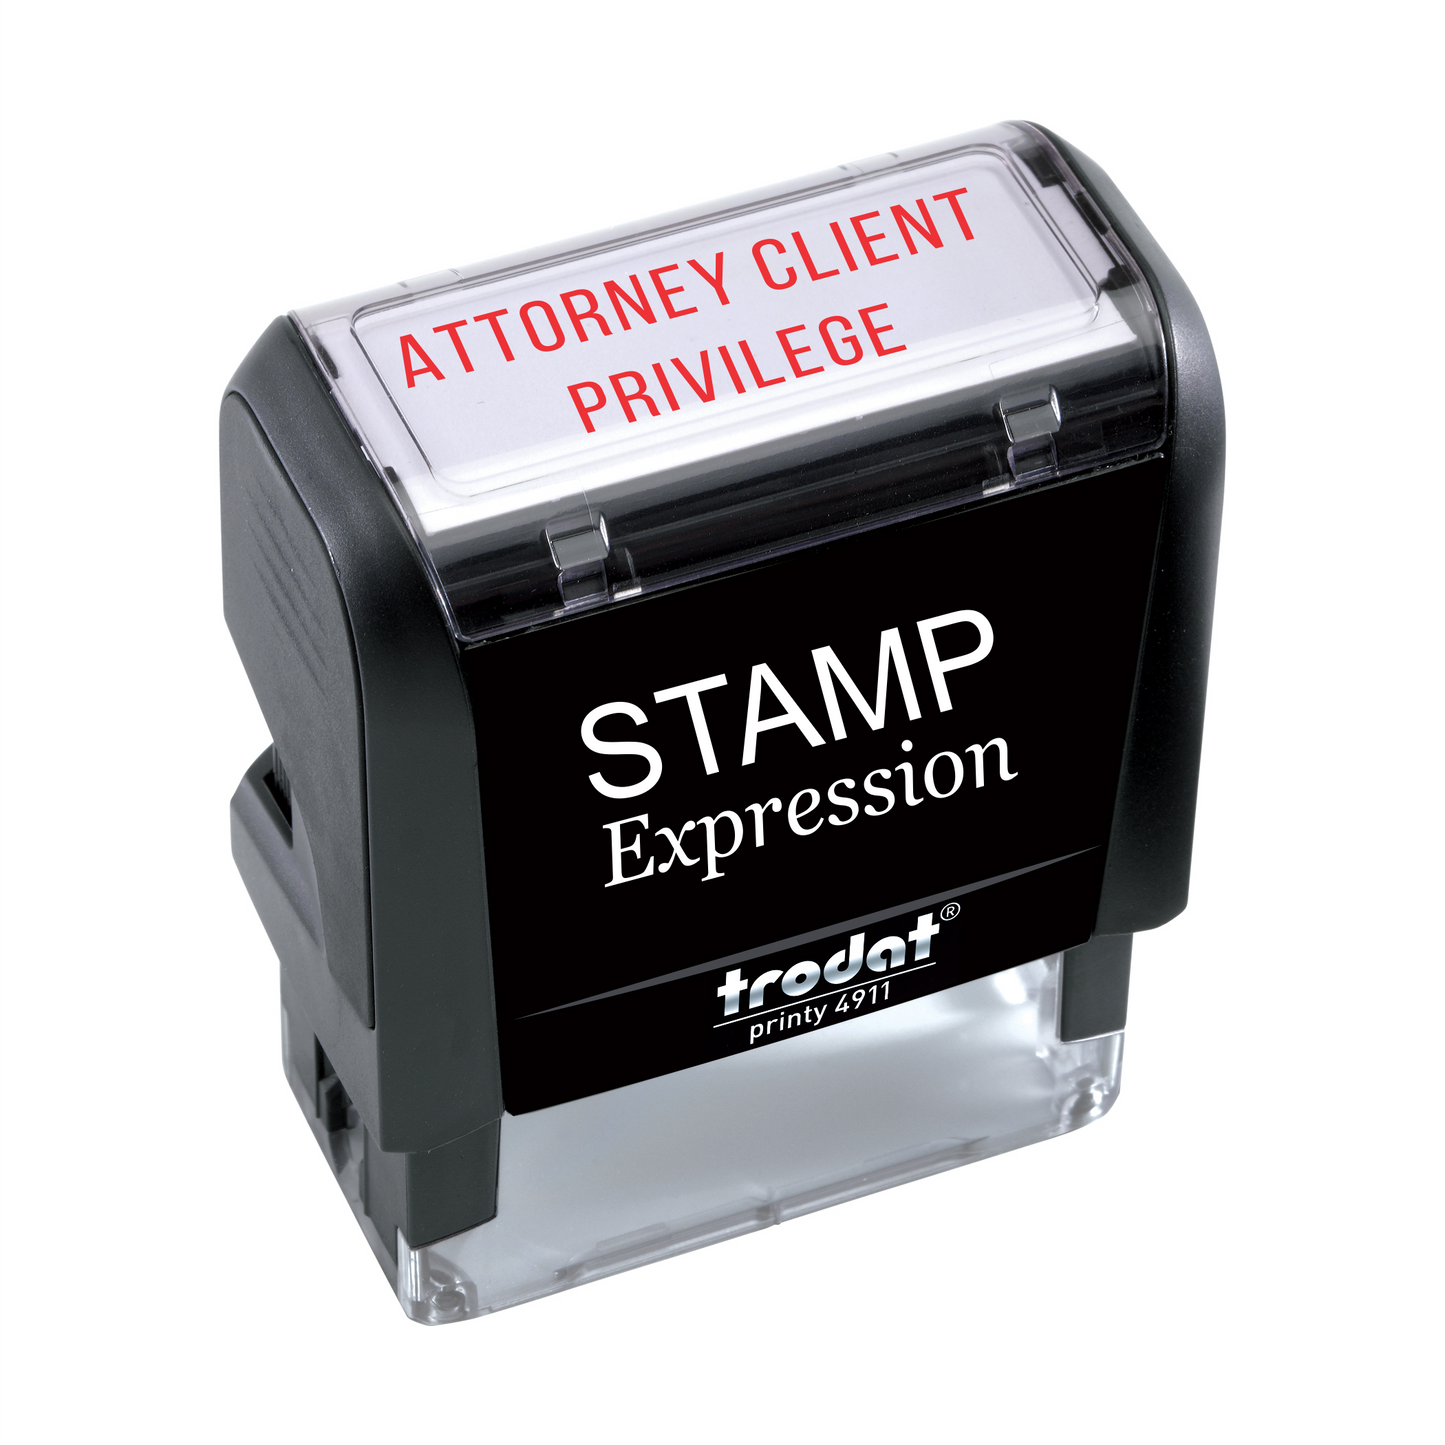 Attorney Client Privilege Office Self Inking Rubber Stamp (SH-5438)